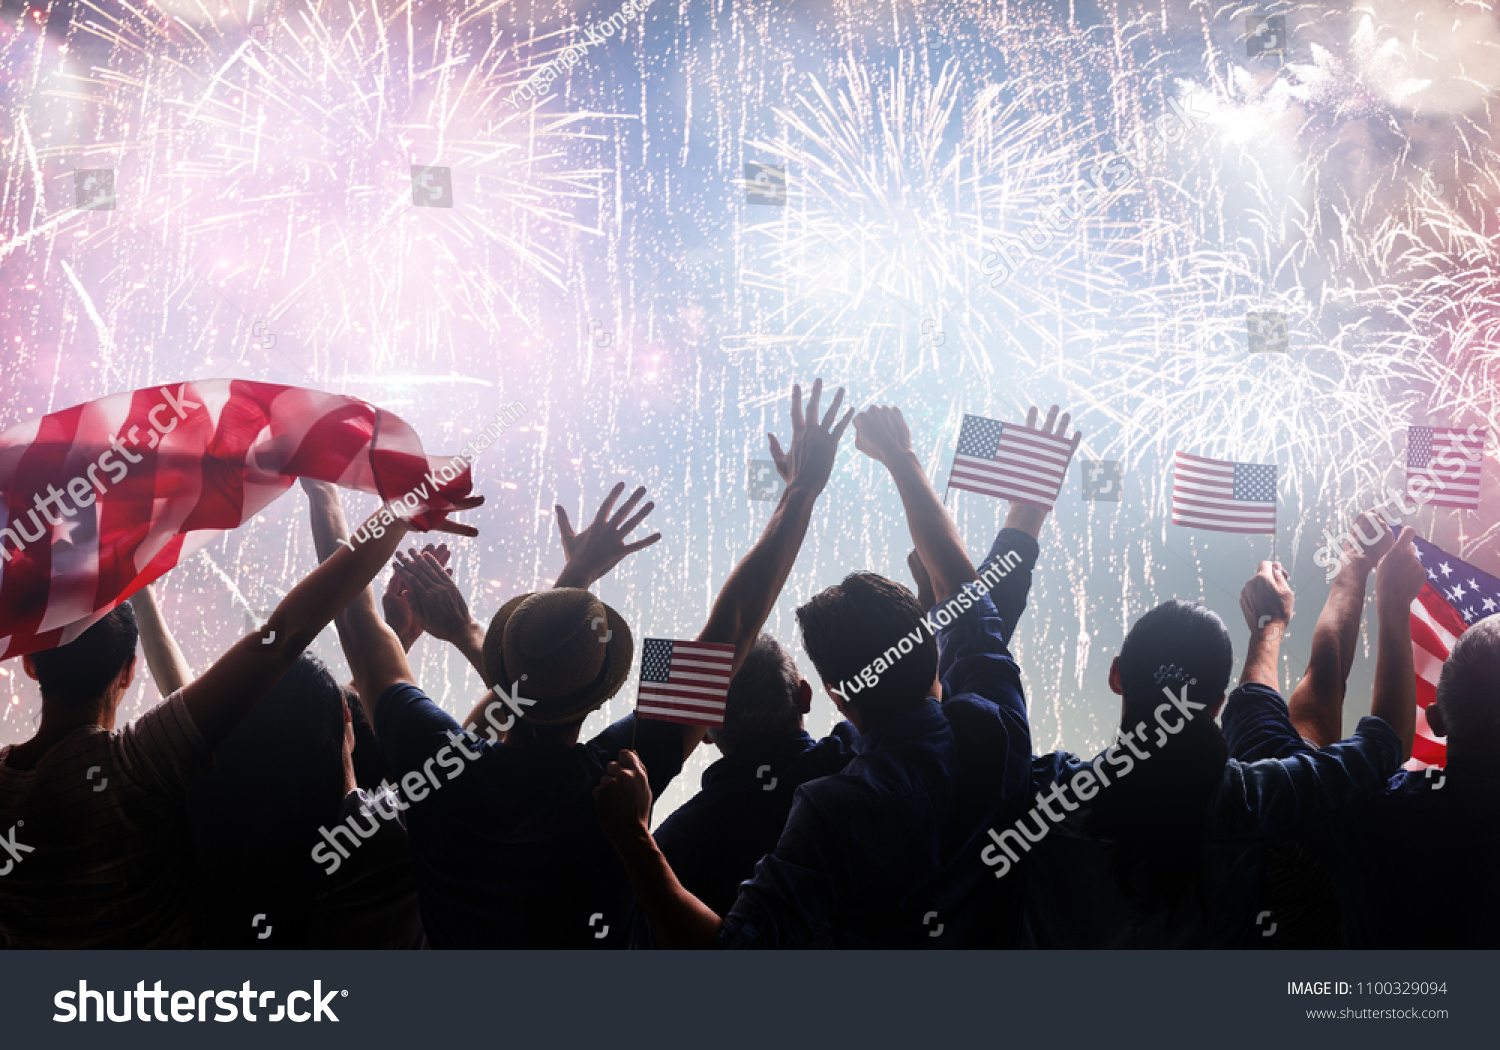 Patriotic holiday. Silhouettes of people holding the Flag of the USA. America celebrate 4th of July. #1100329094